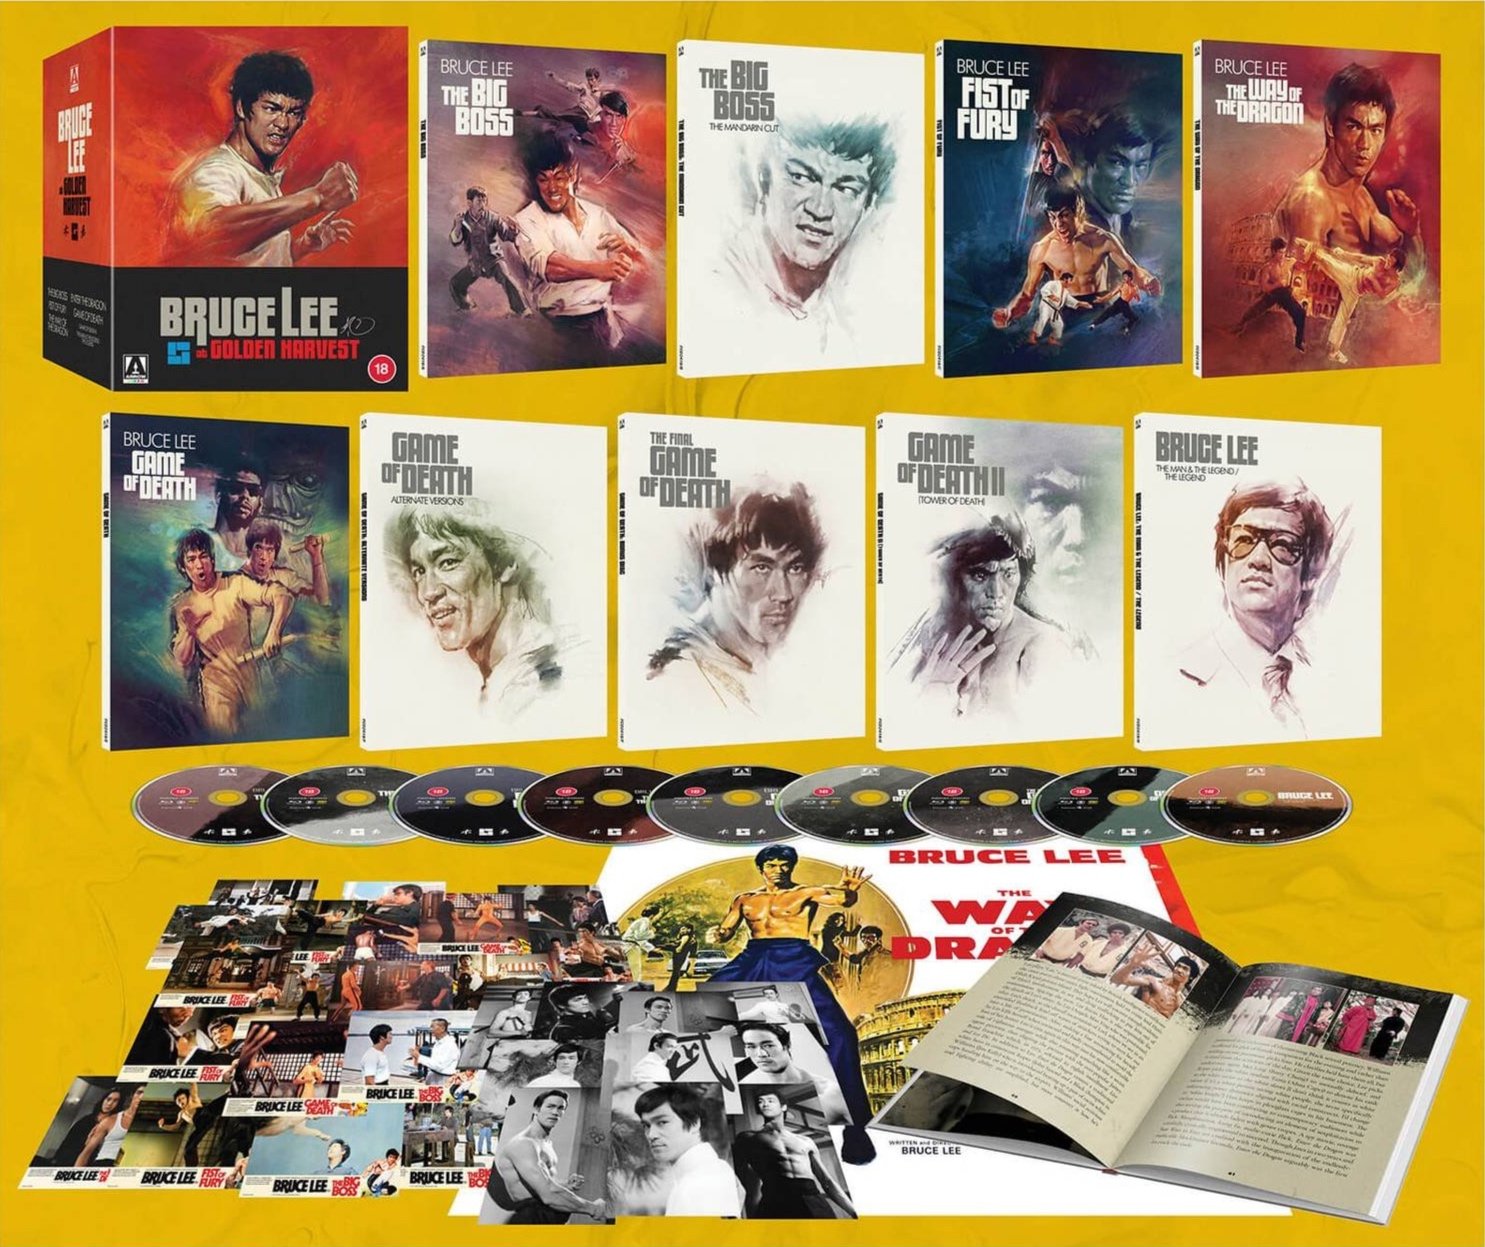 Bruce Lee at Golden Harvest Blu-ray Limited Edition